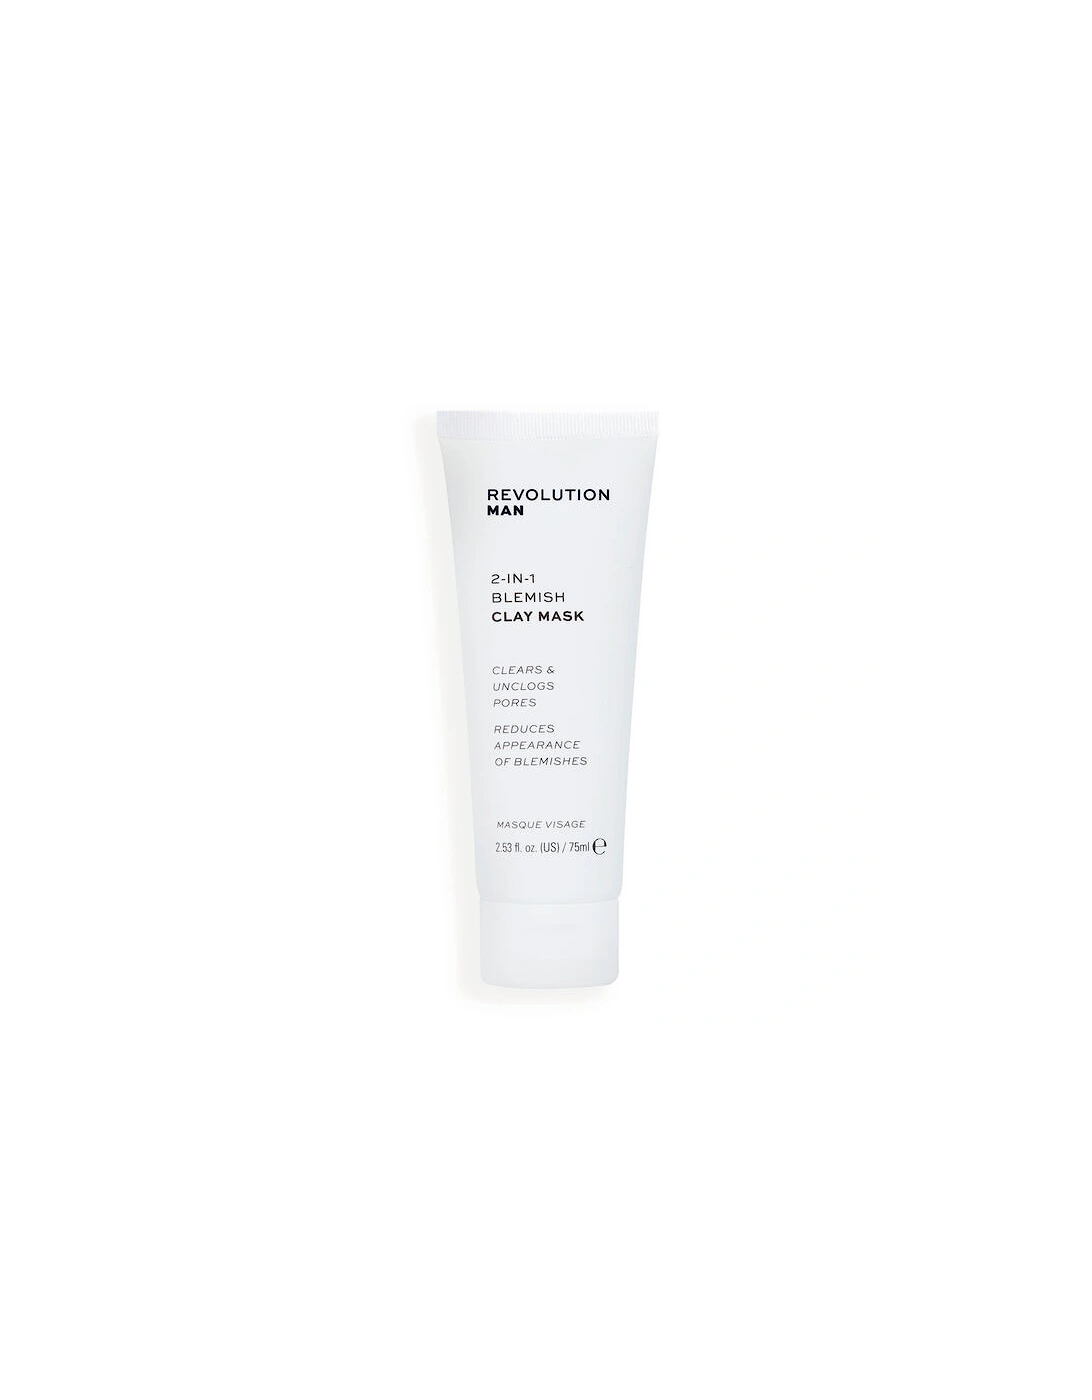 Man 2 in 1 Blemish Clay Mask, 2 of 1